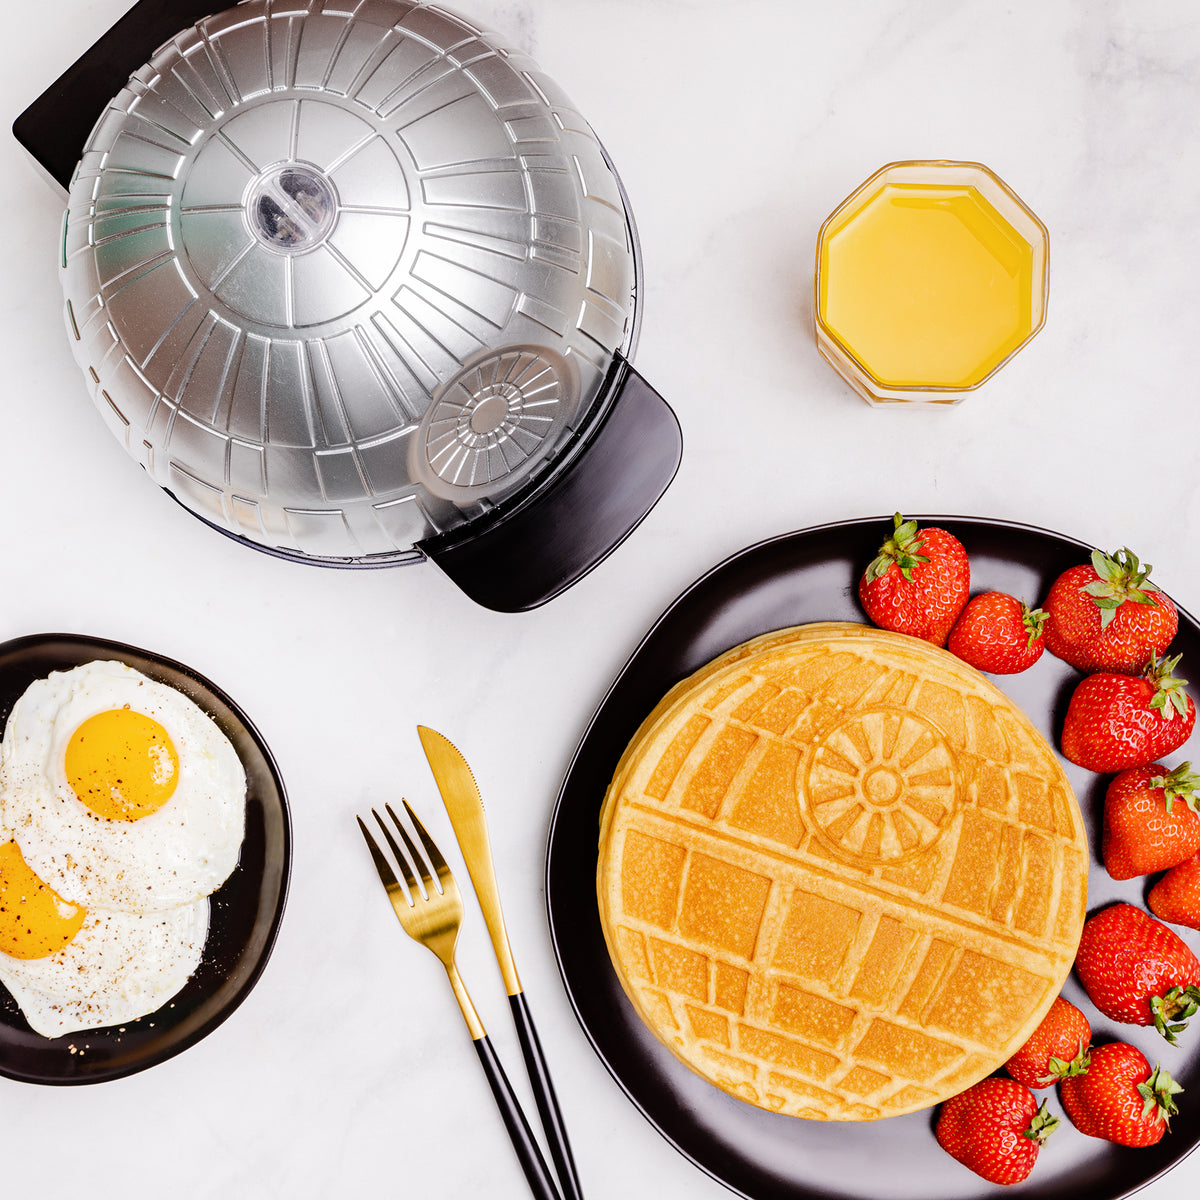 BEST STAR WARS GIFTS ON : HOME & KITCHEN - Butter with a Side of Bread